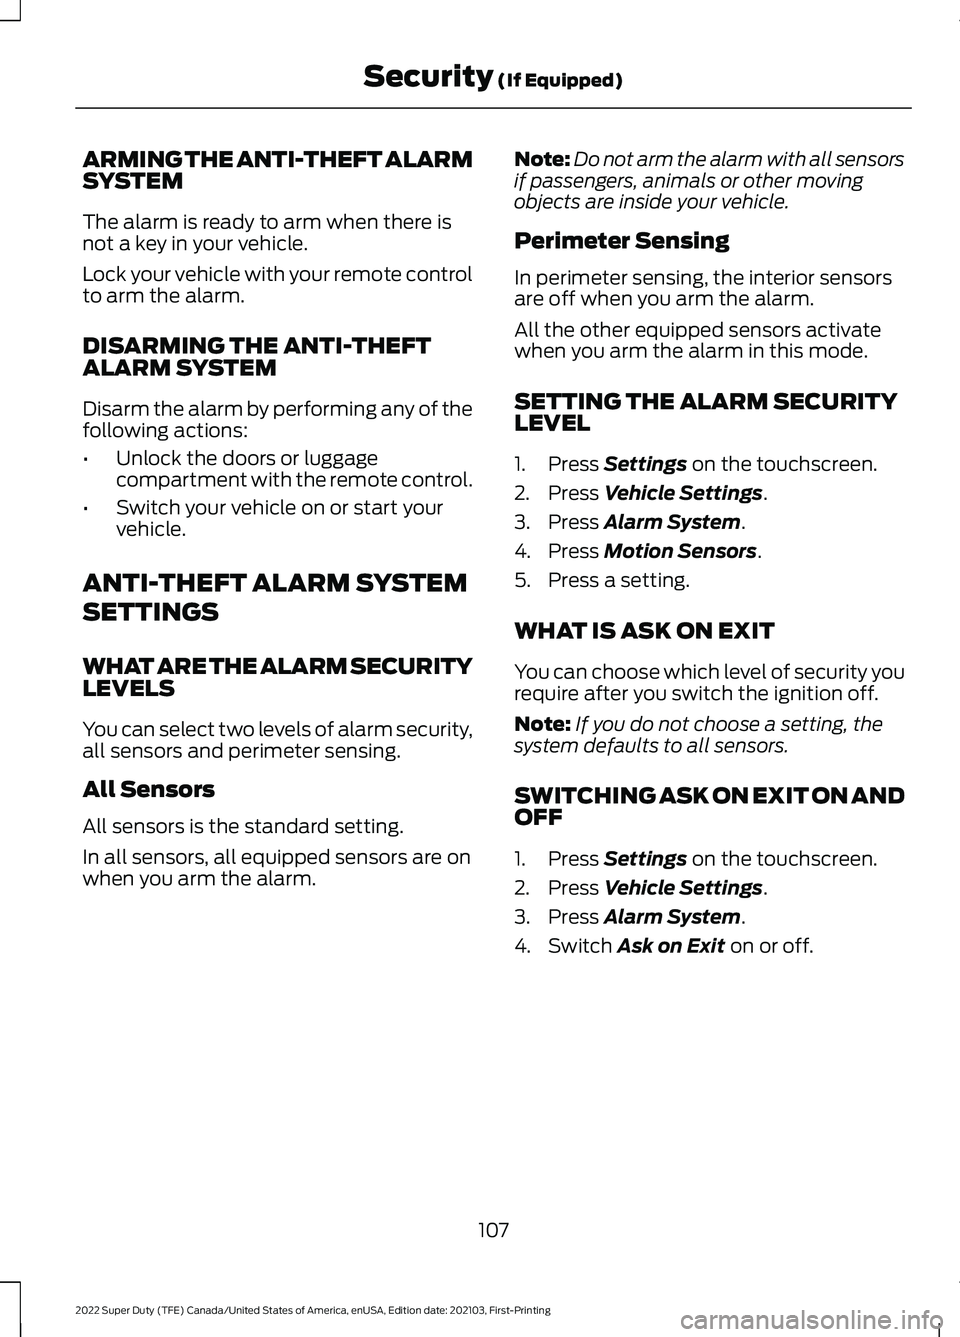 FORD F-350 2022  Owners Manual ARMING THE ANTI-THEFT ALARM
SYSTEM
The alarm is ready to arm when there is
not a key in your vehicle.
Lock your vehicle with your remote control
to arm the alarm.
DISARMING THE ANTI-THEFT
ALARM SYSTEM